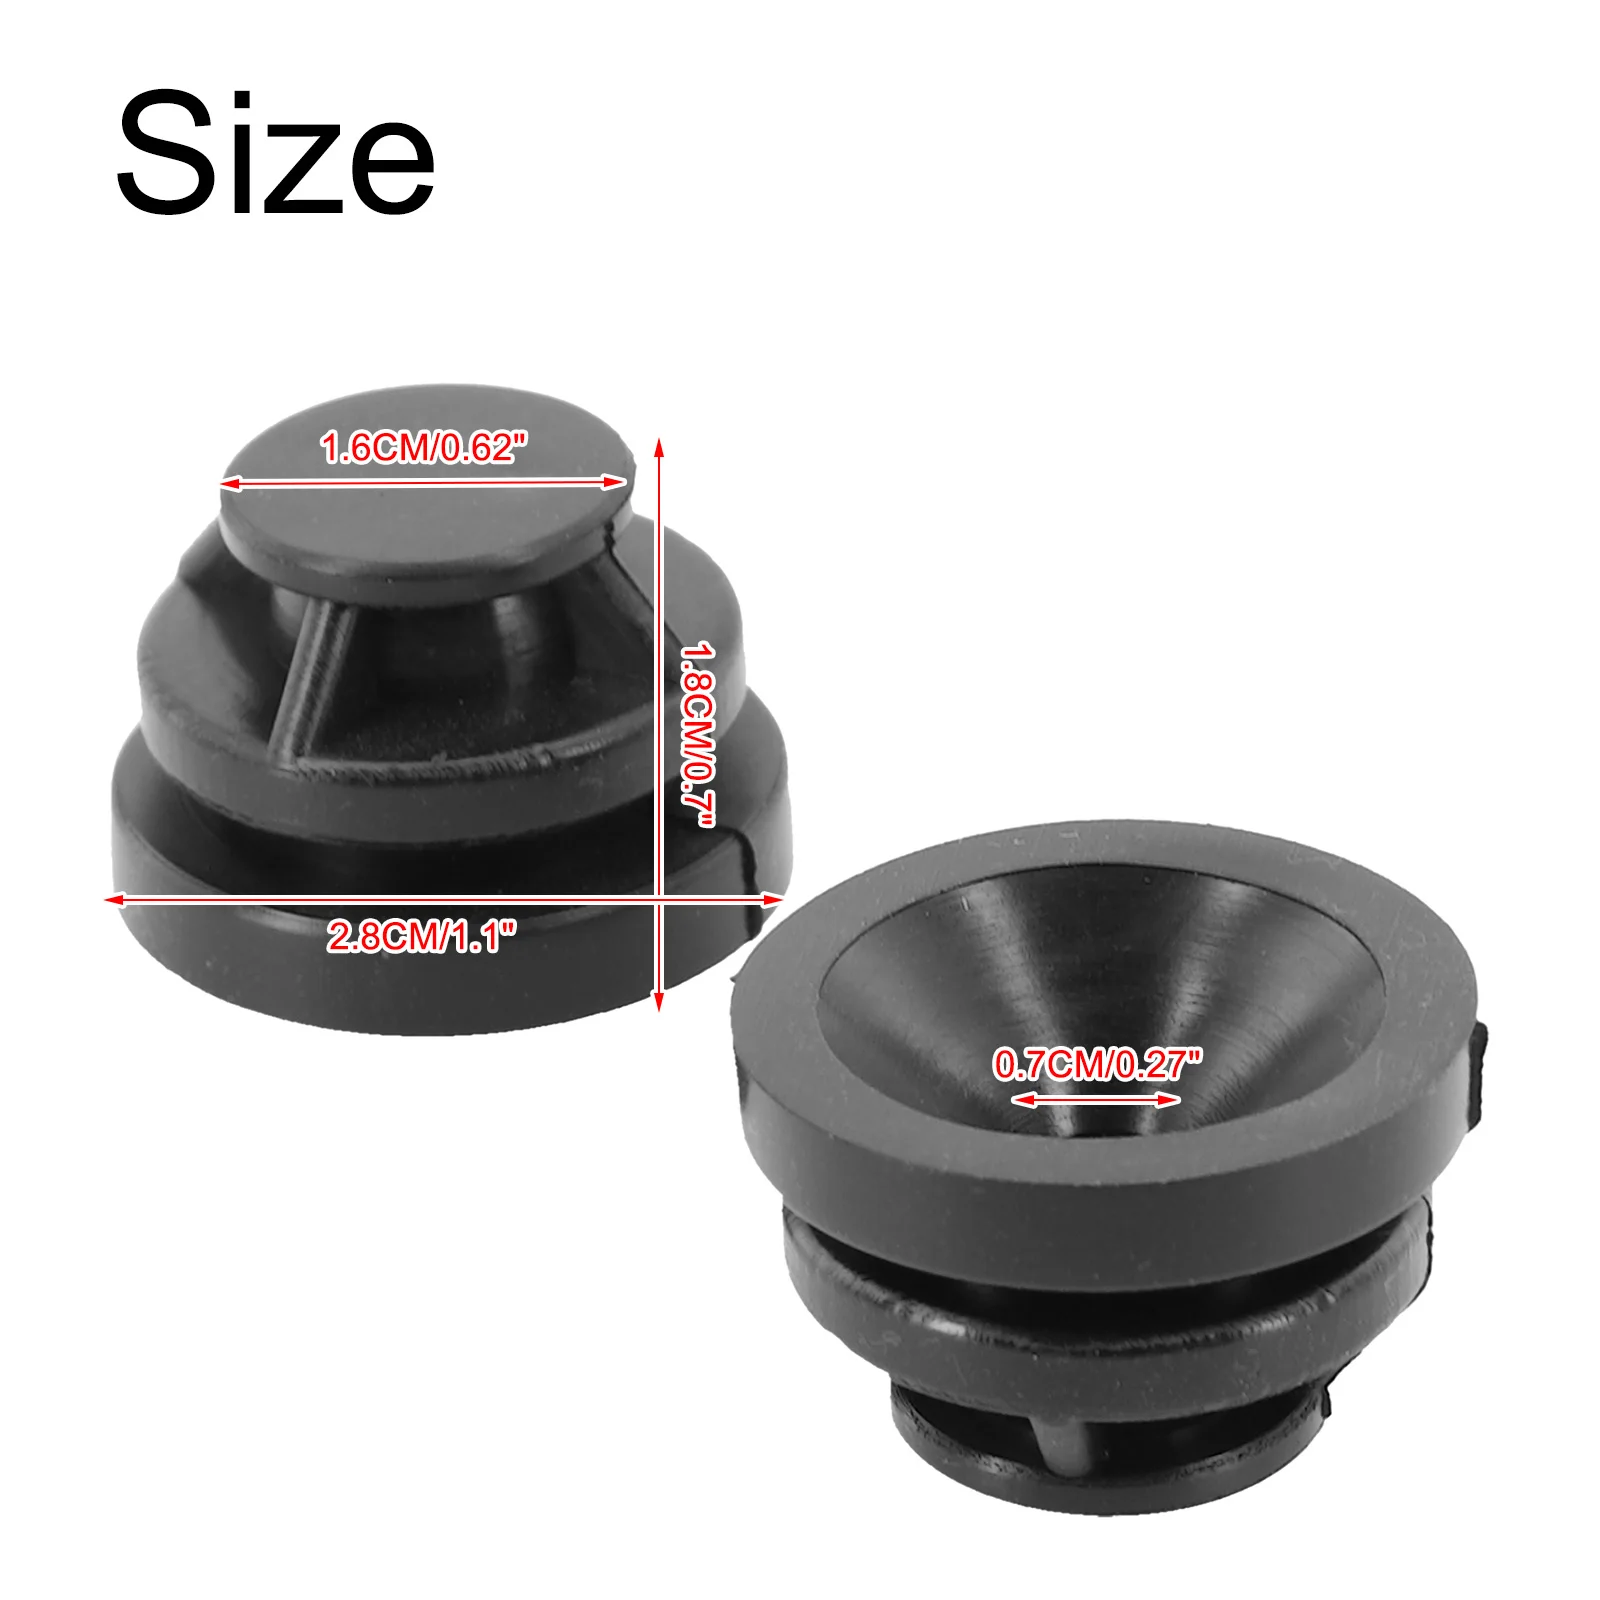 

Auto Car Engine Cover Mounts Car Accessories 2 PCS Black Car Engine Cover Rubber Mount P30110238 Rubber None New